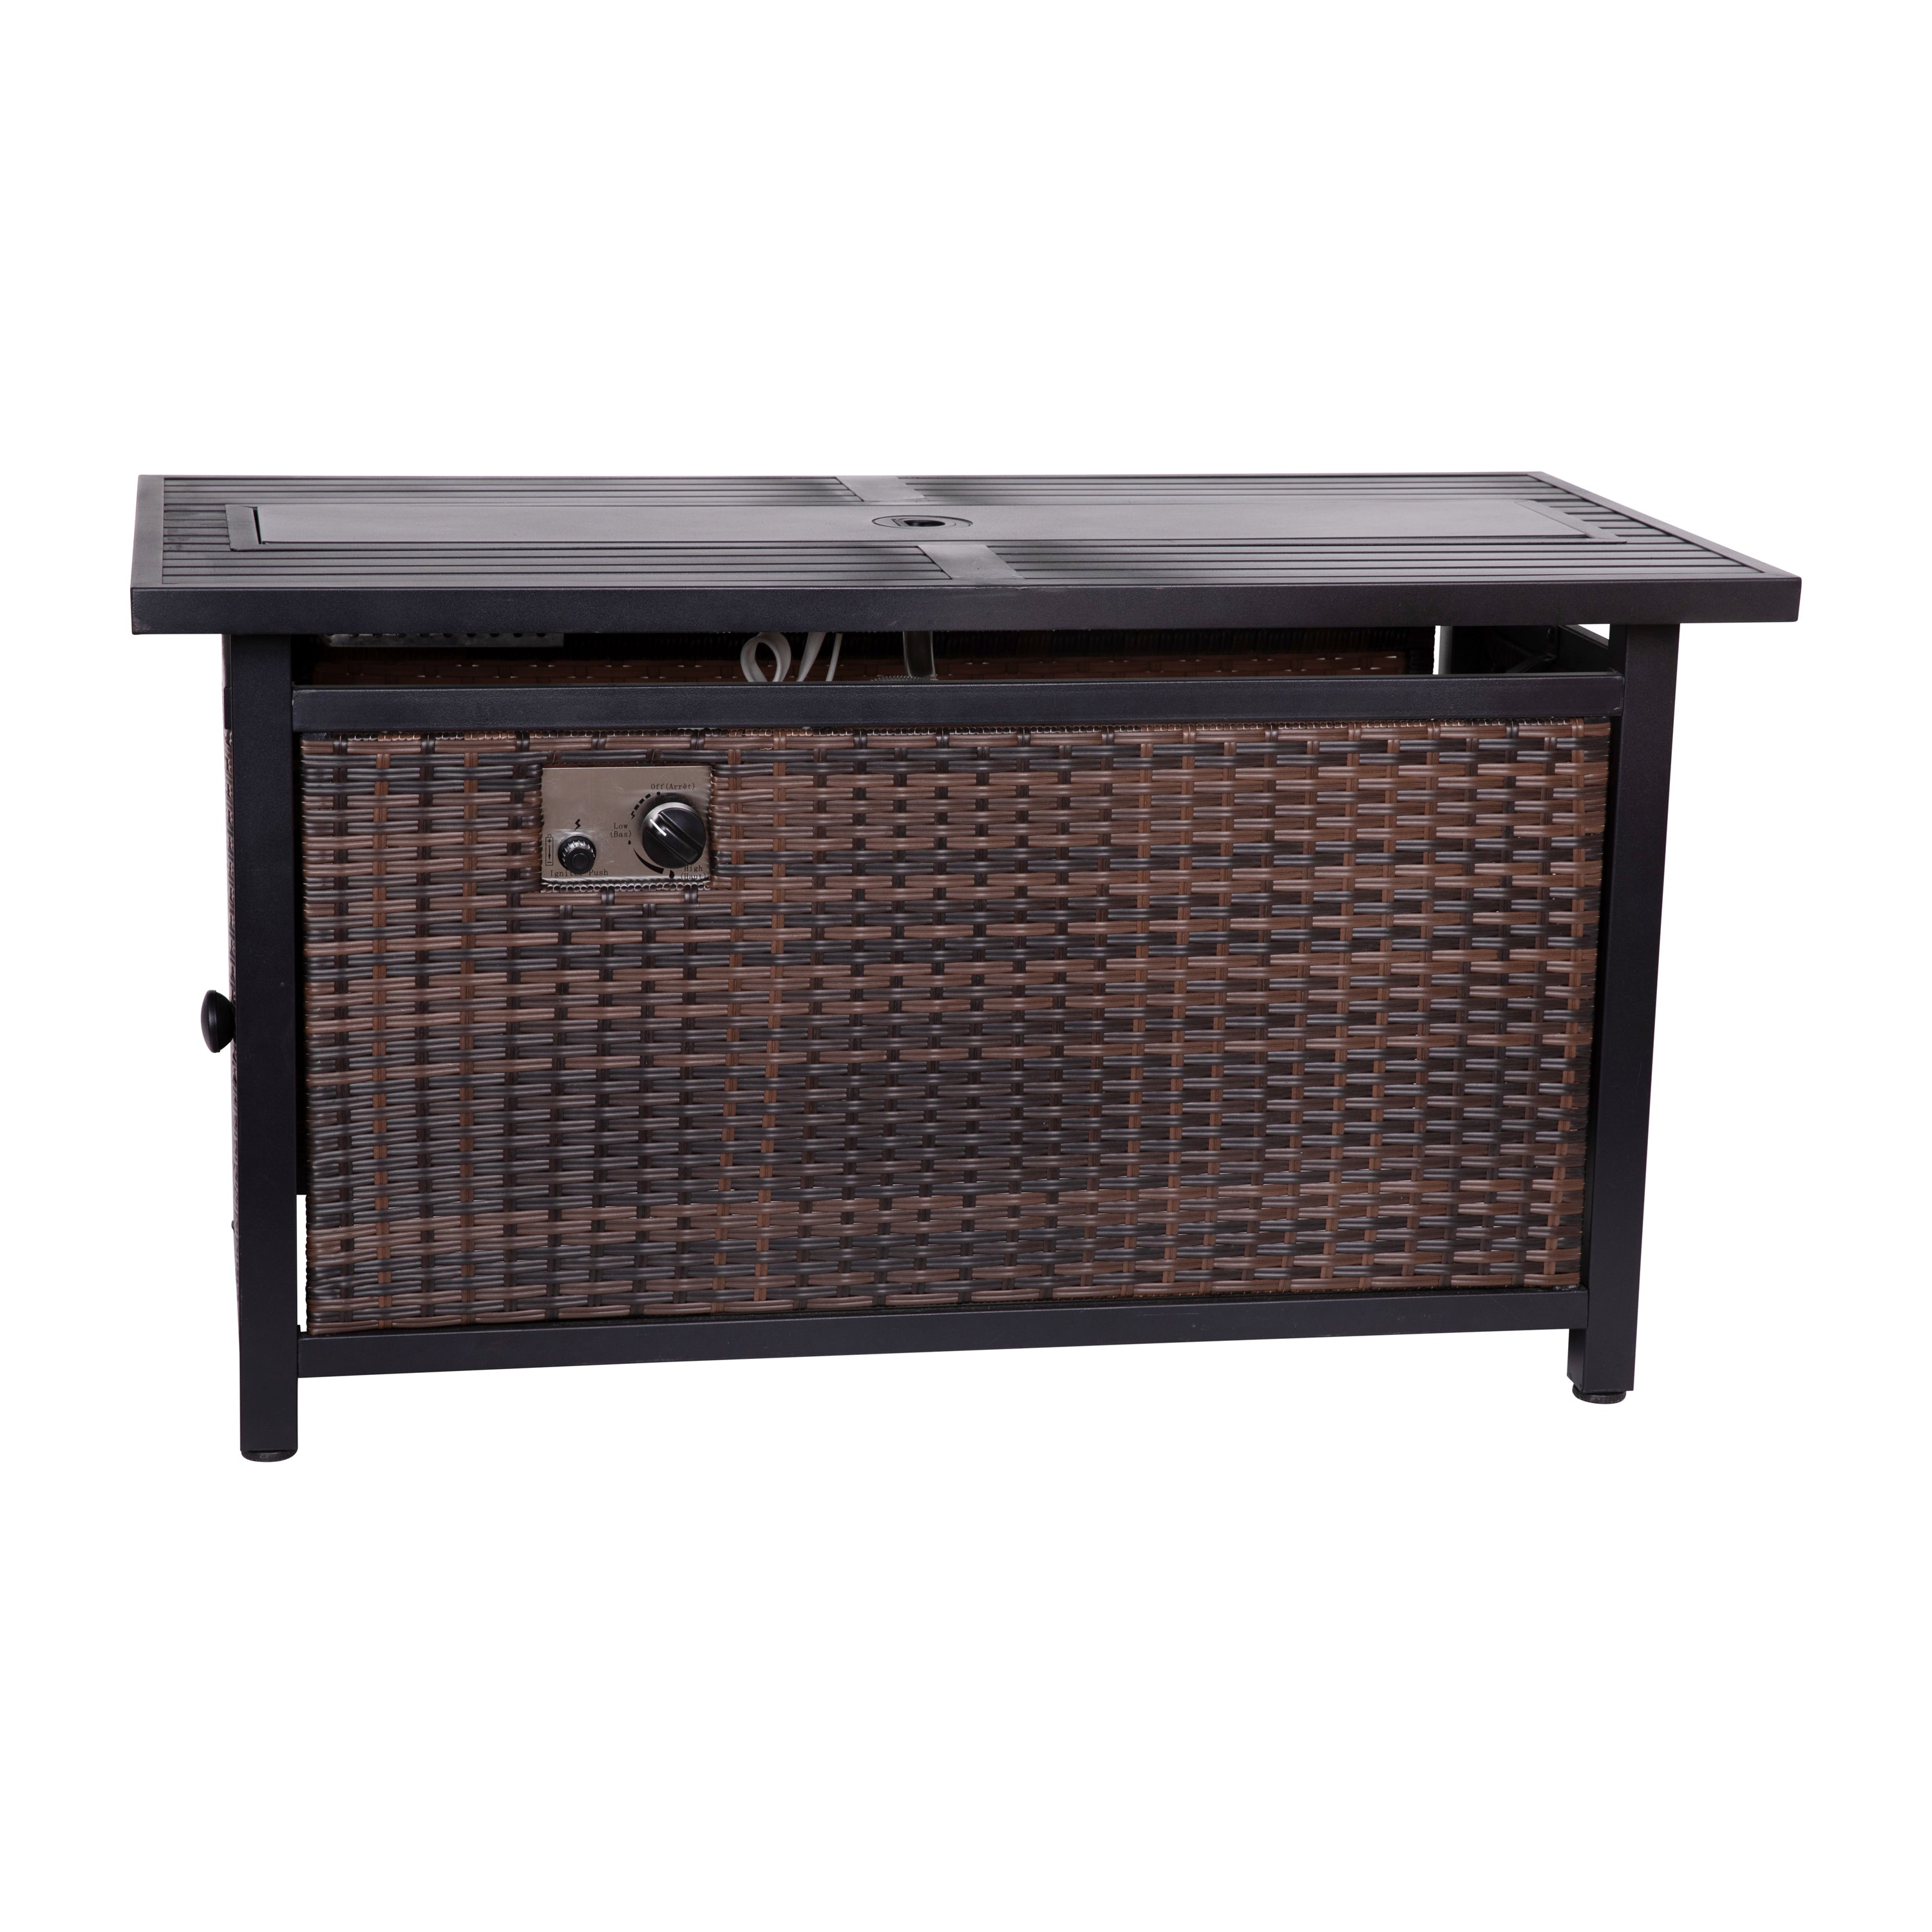 Olympia Outdoor Propane Gas 50,000 BTU Fire Pit Table with Stainless Steel Tabletop, Lid, Glass Beads, Wicker Base-Outdoor FirePit-Flash Furniture-Wall2Wall Furnishings